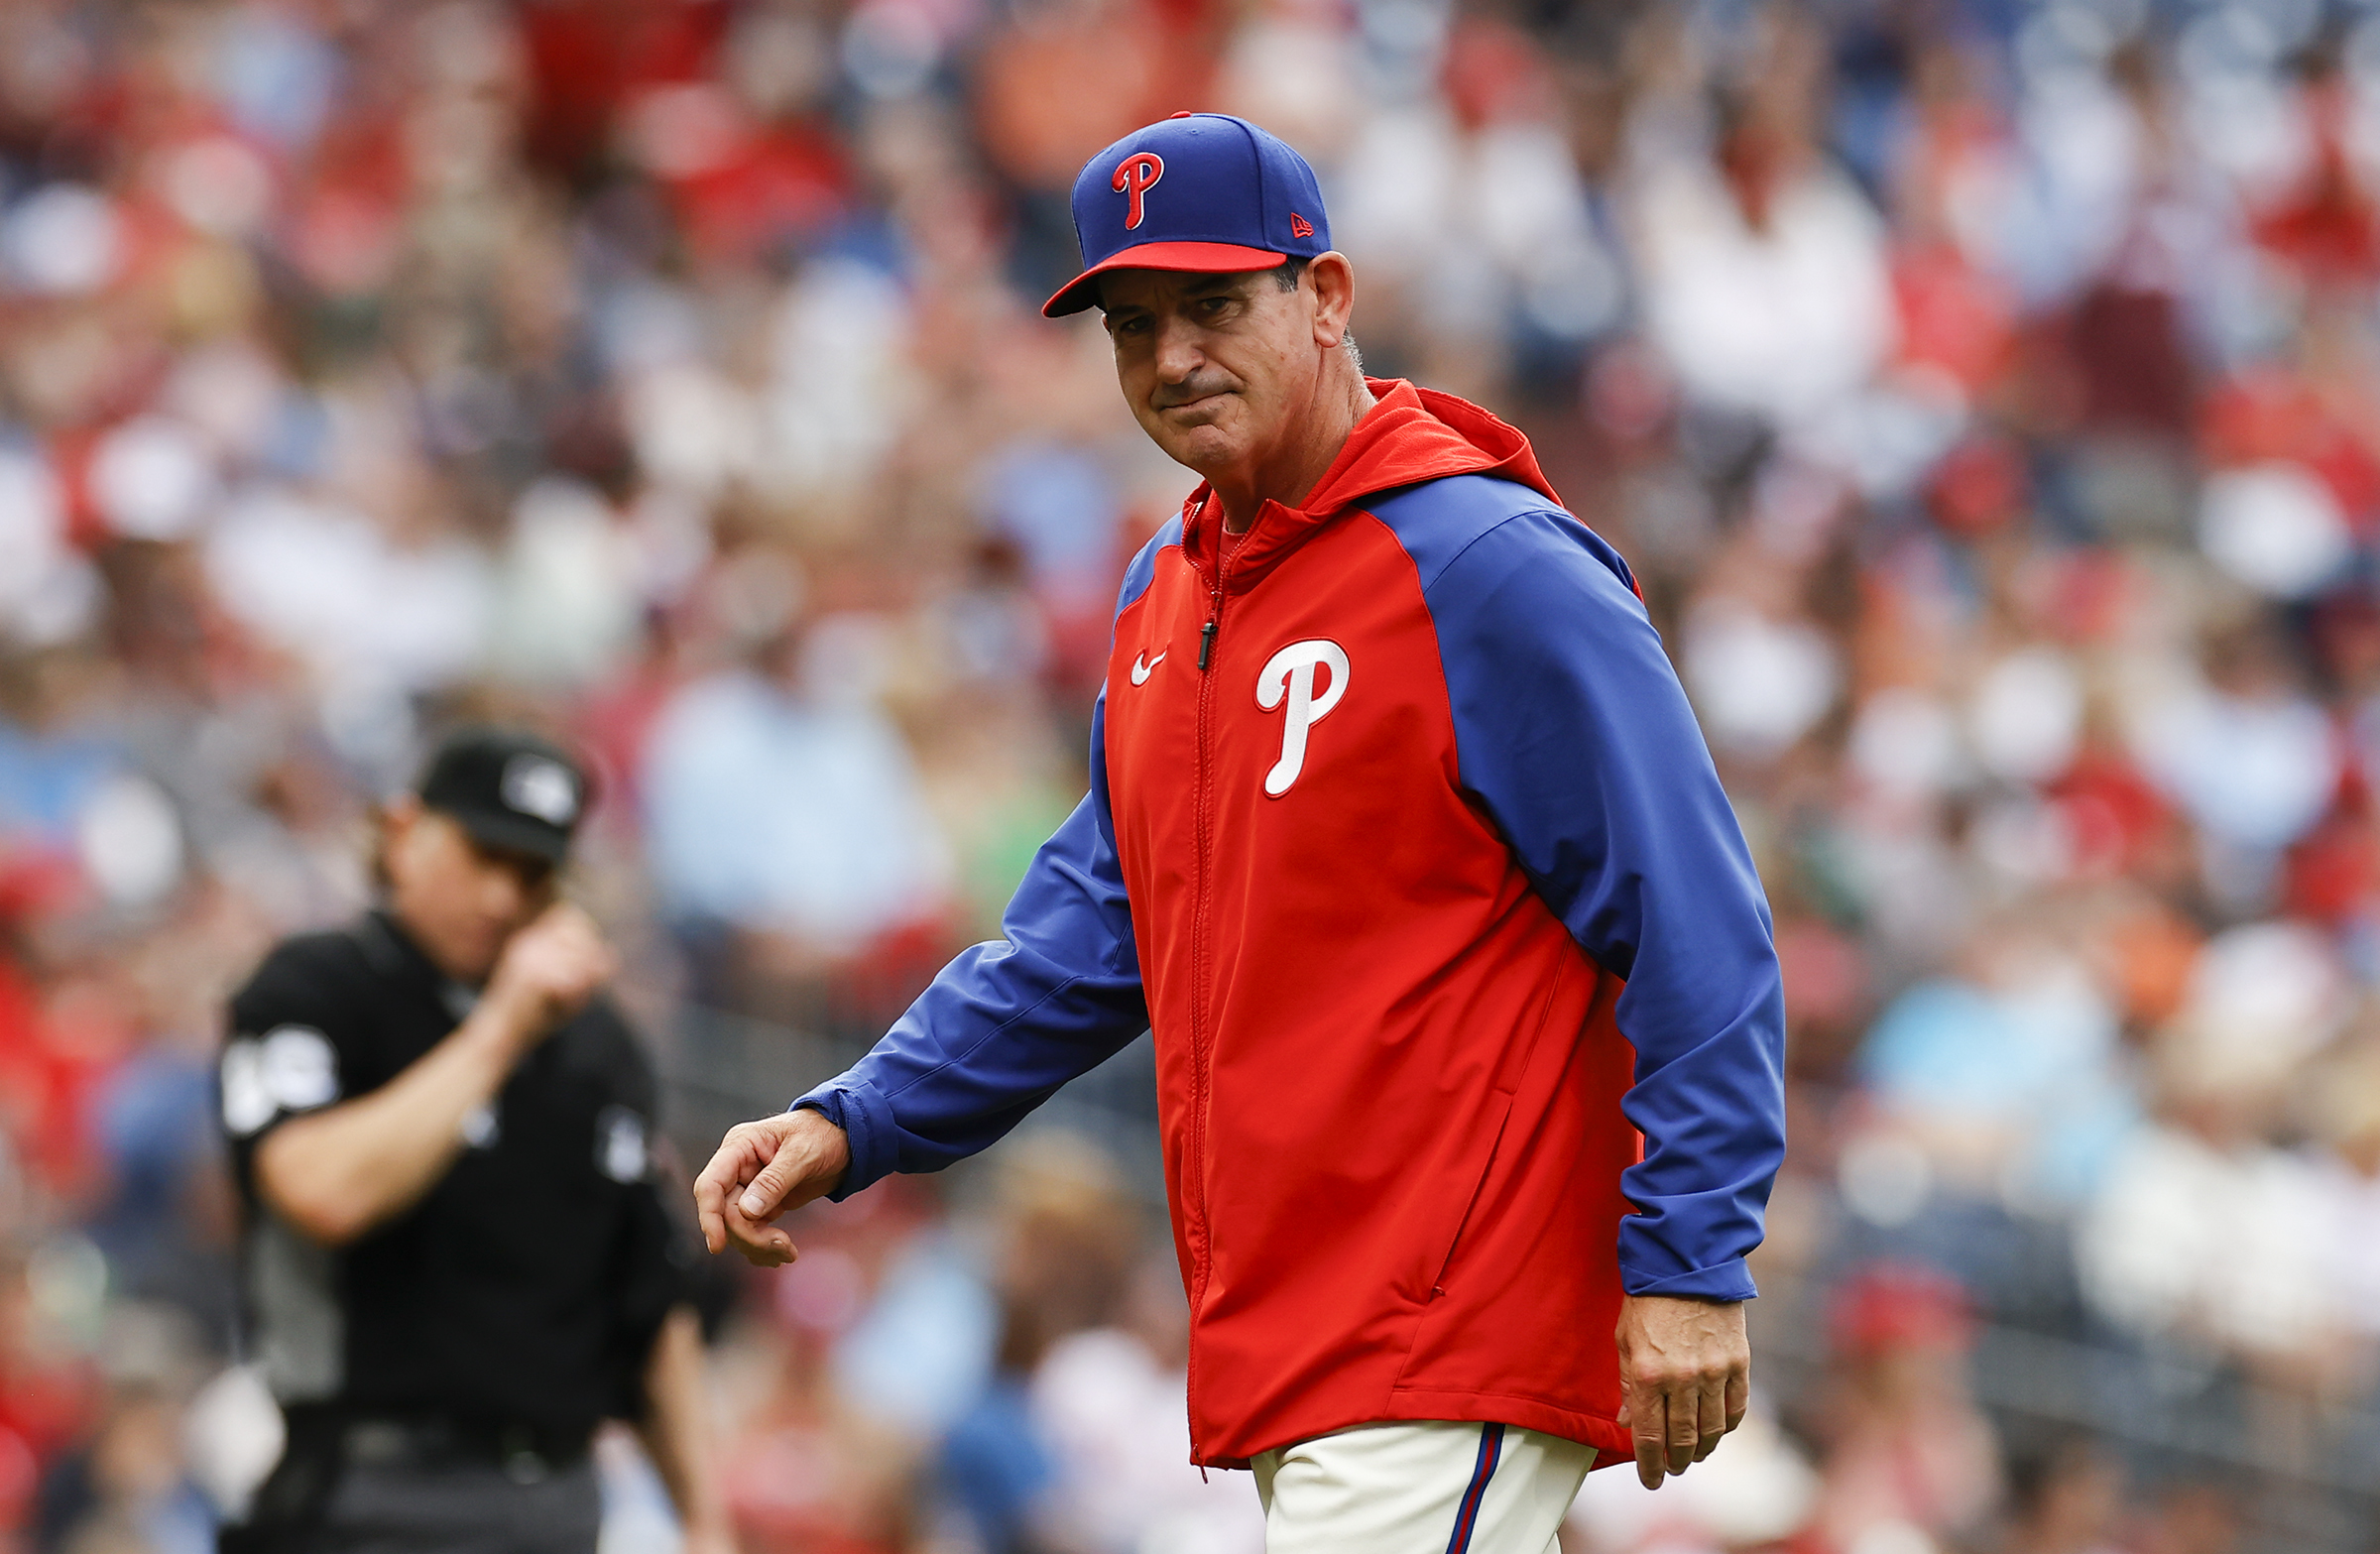 Phillies interim manager Rob Thomson faced another interim manager,  Toronto's John Schneider, on Wednesday